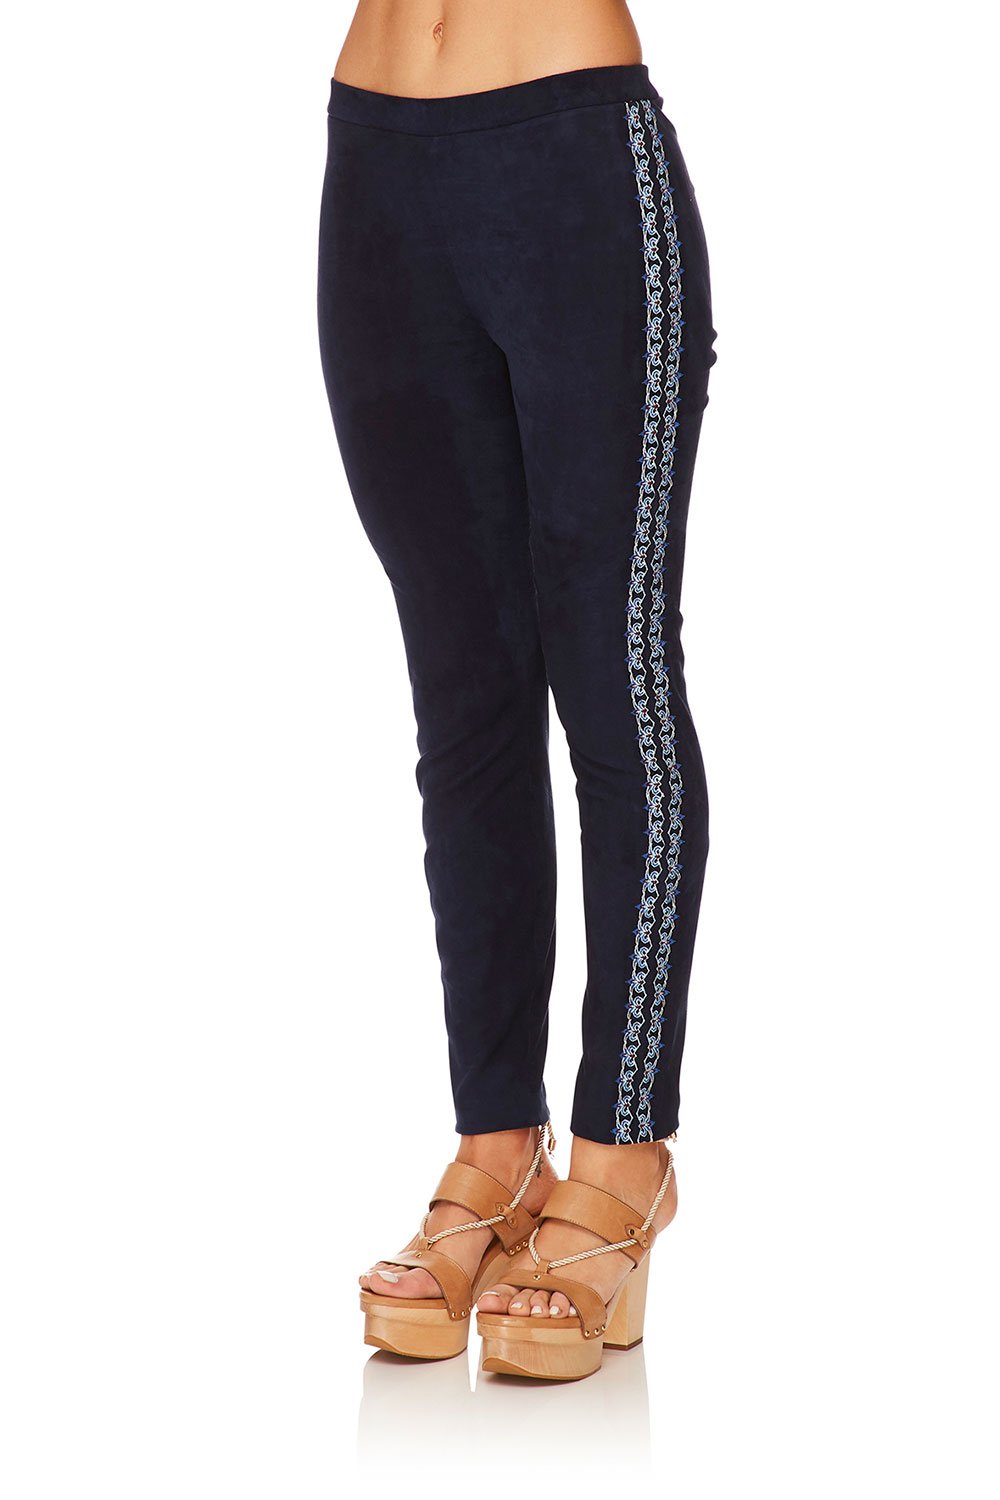 CAMILLA FOR THE FANS ELASTIC WAISTBAND SUEDE LEGGING